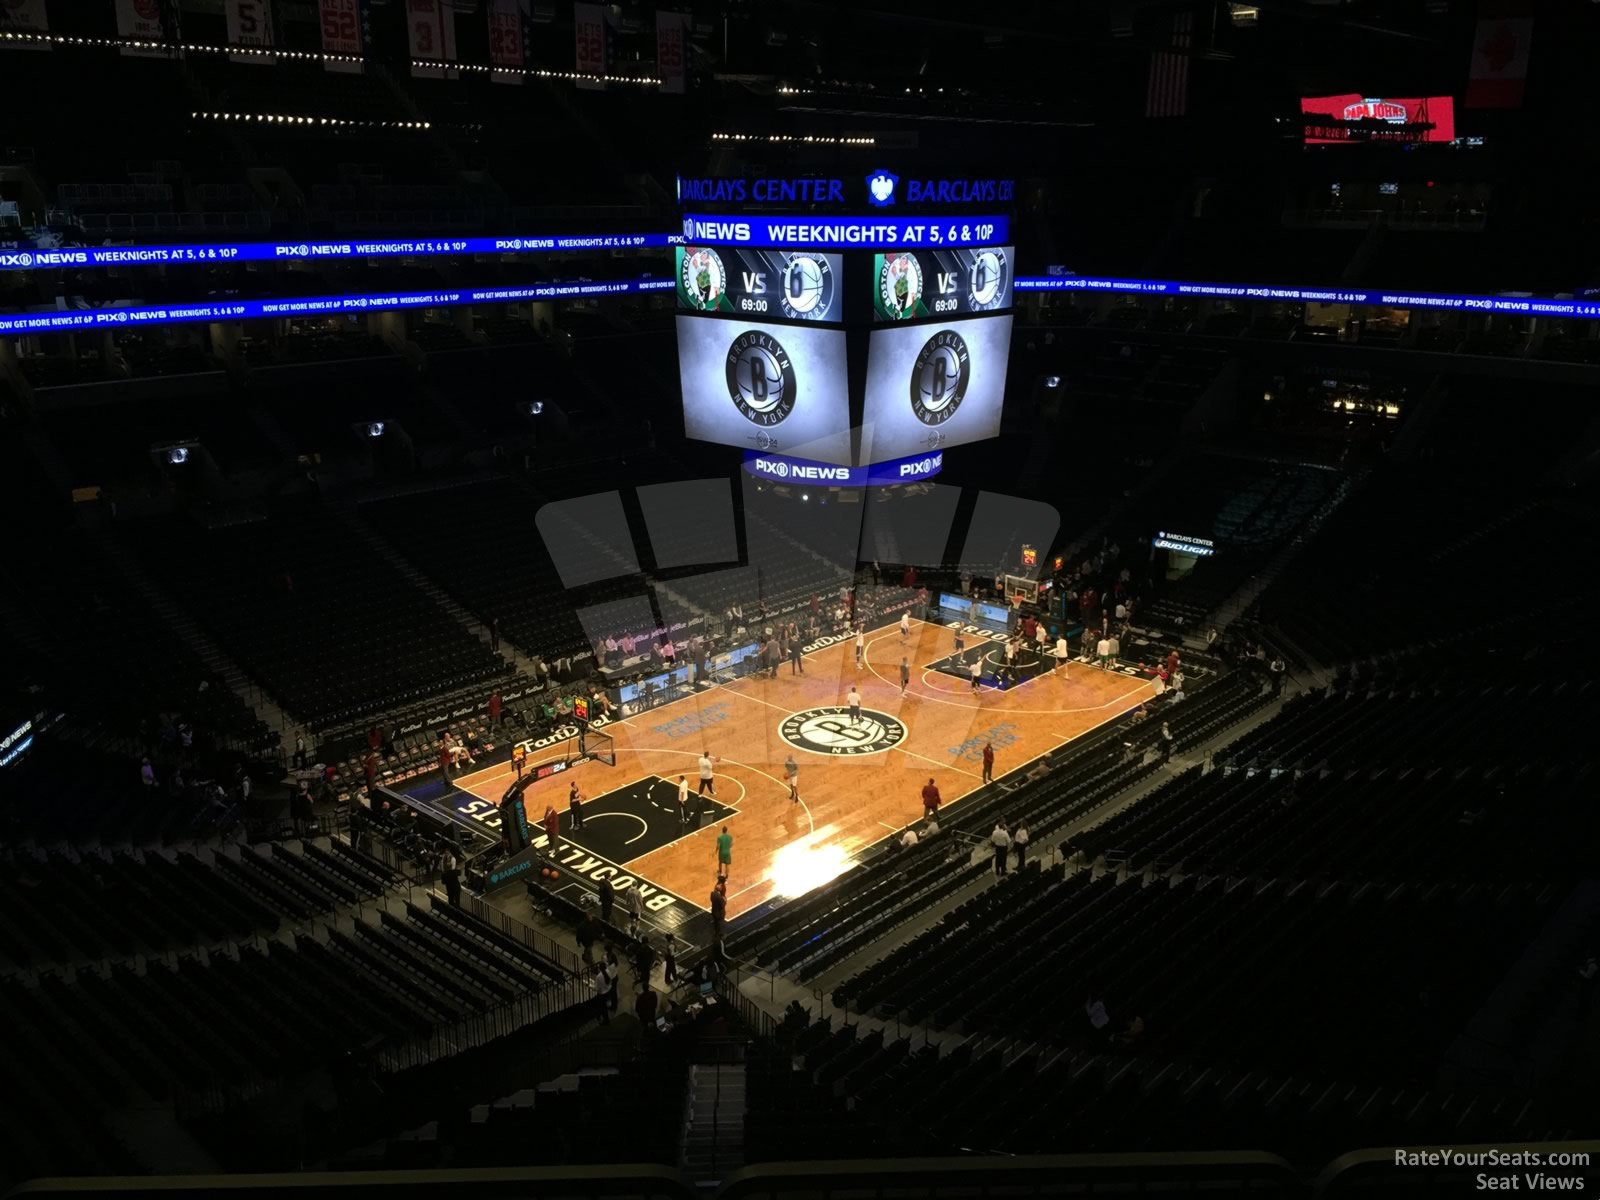 section 228, row 10 seat view  for basketball - barclays center